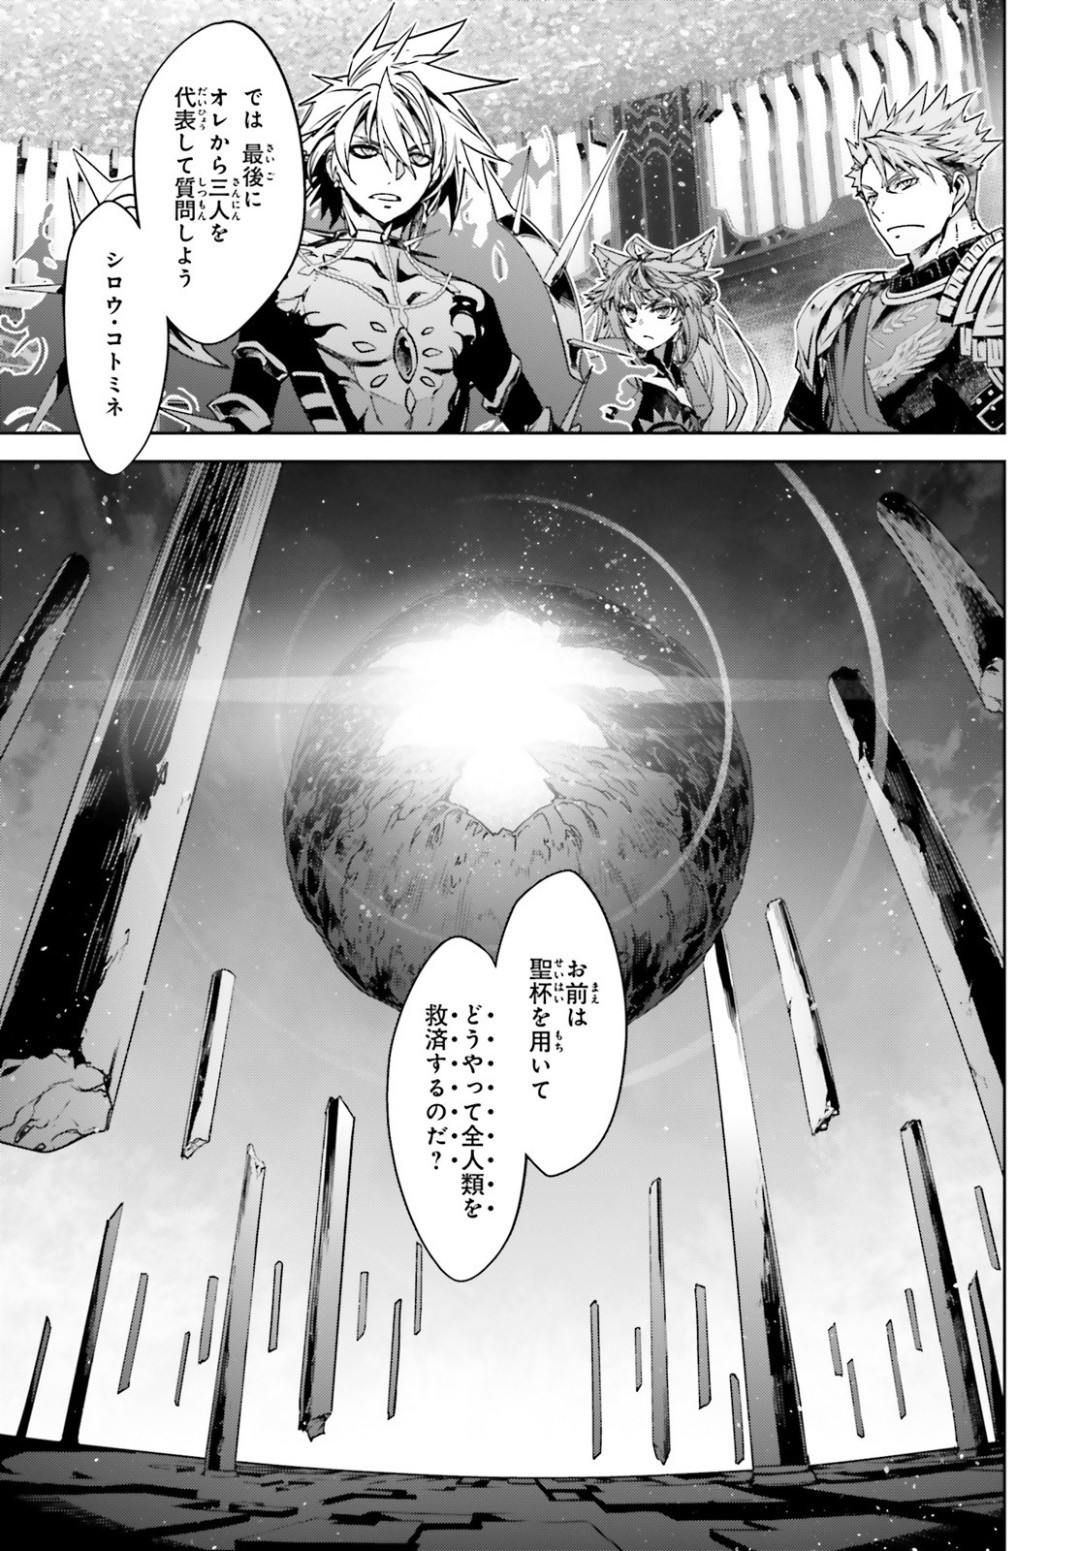 Fate-Apocrypha - Chapter 38 - Page 16